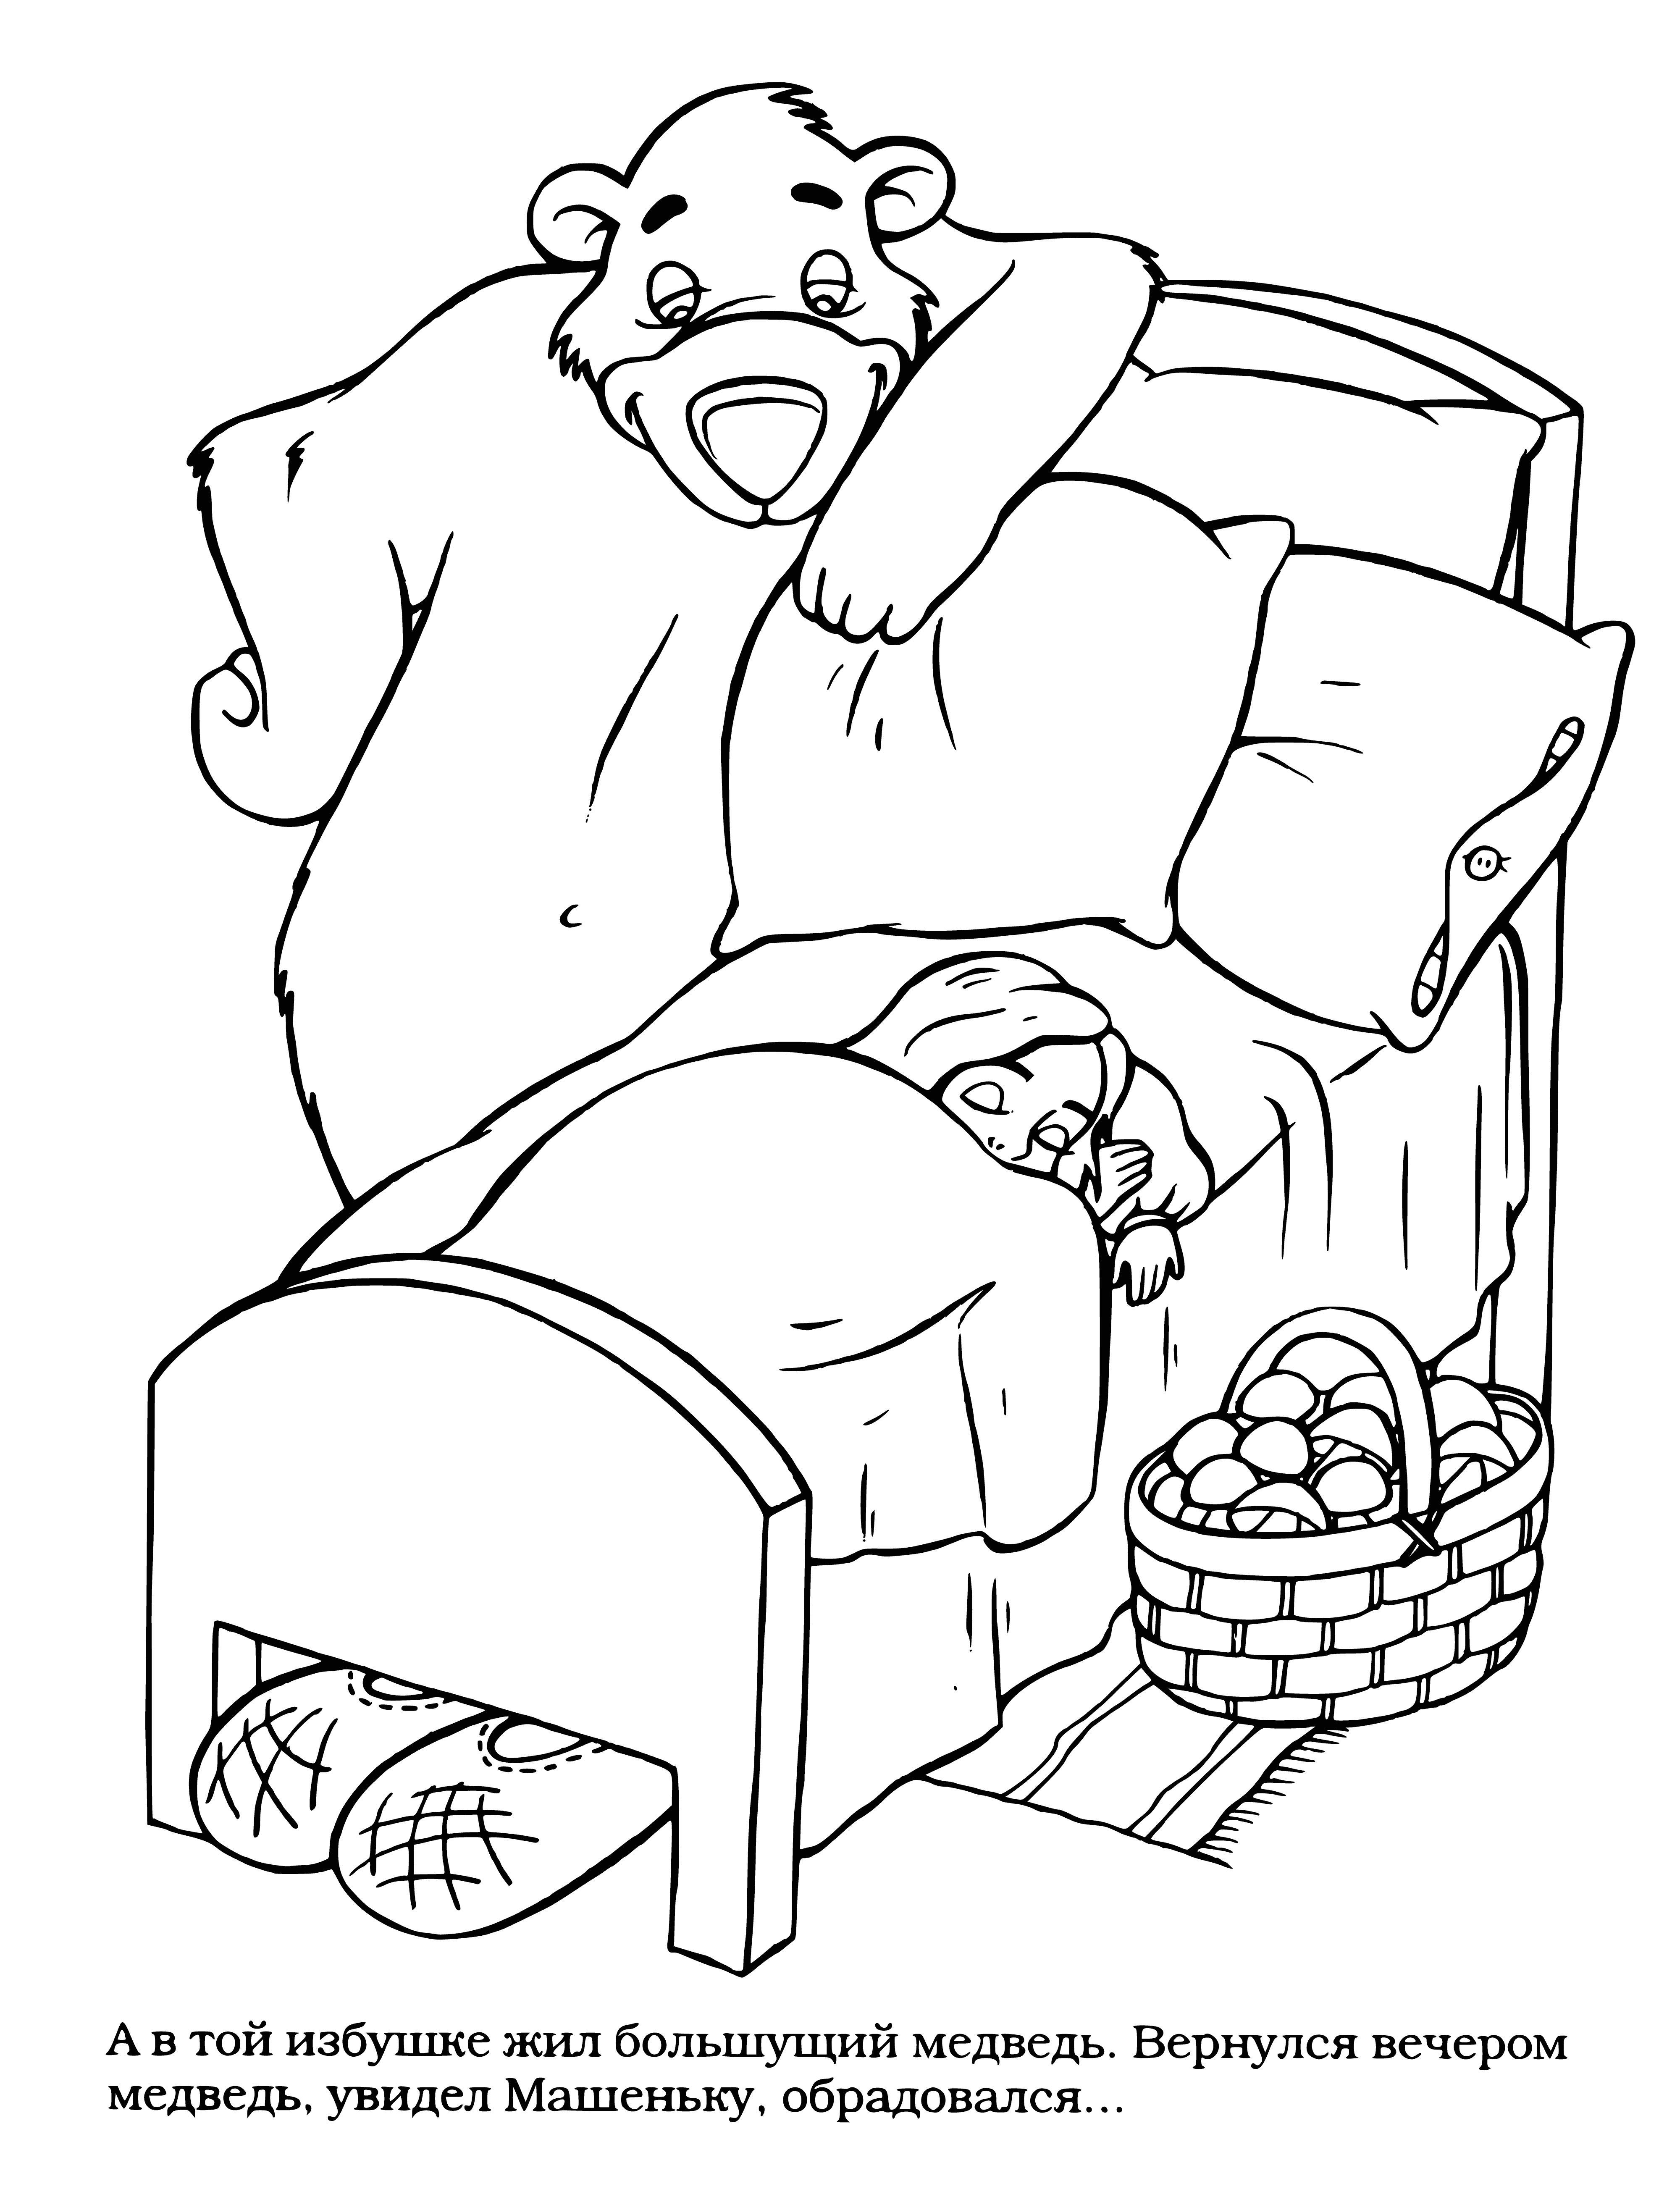 coloring page: Mashenka sleeps peacefully surrounded by her toys, with sun shining through the window above her bed.